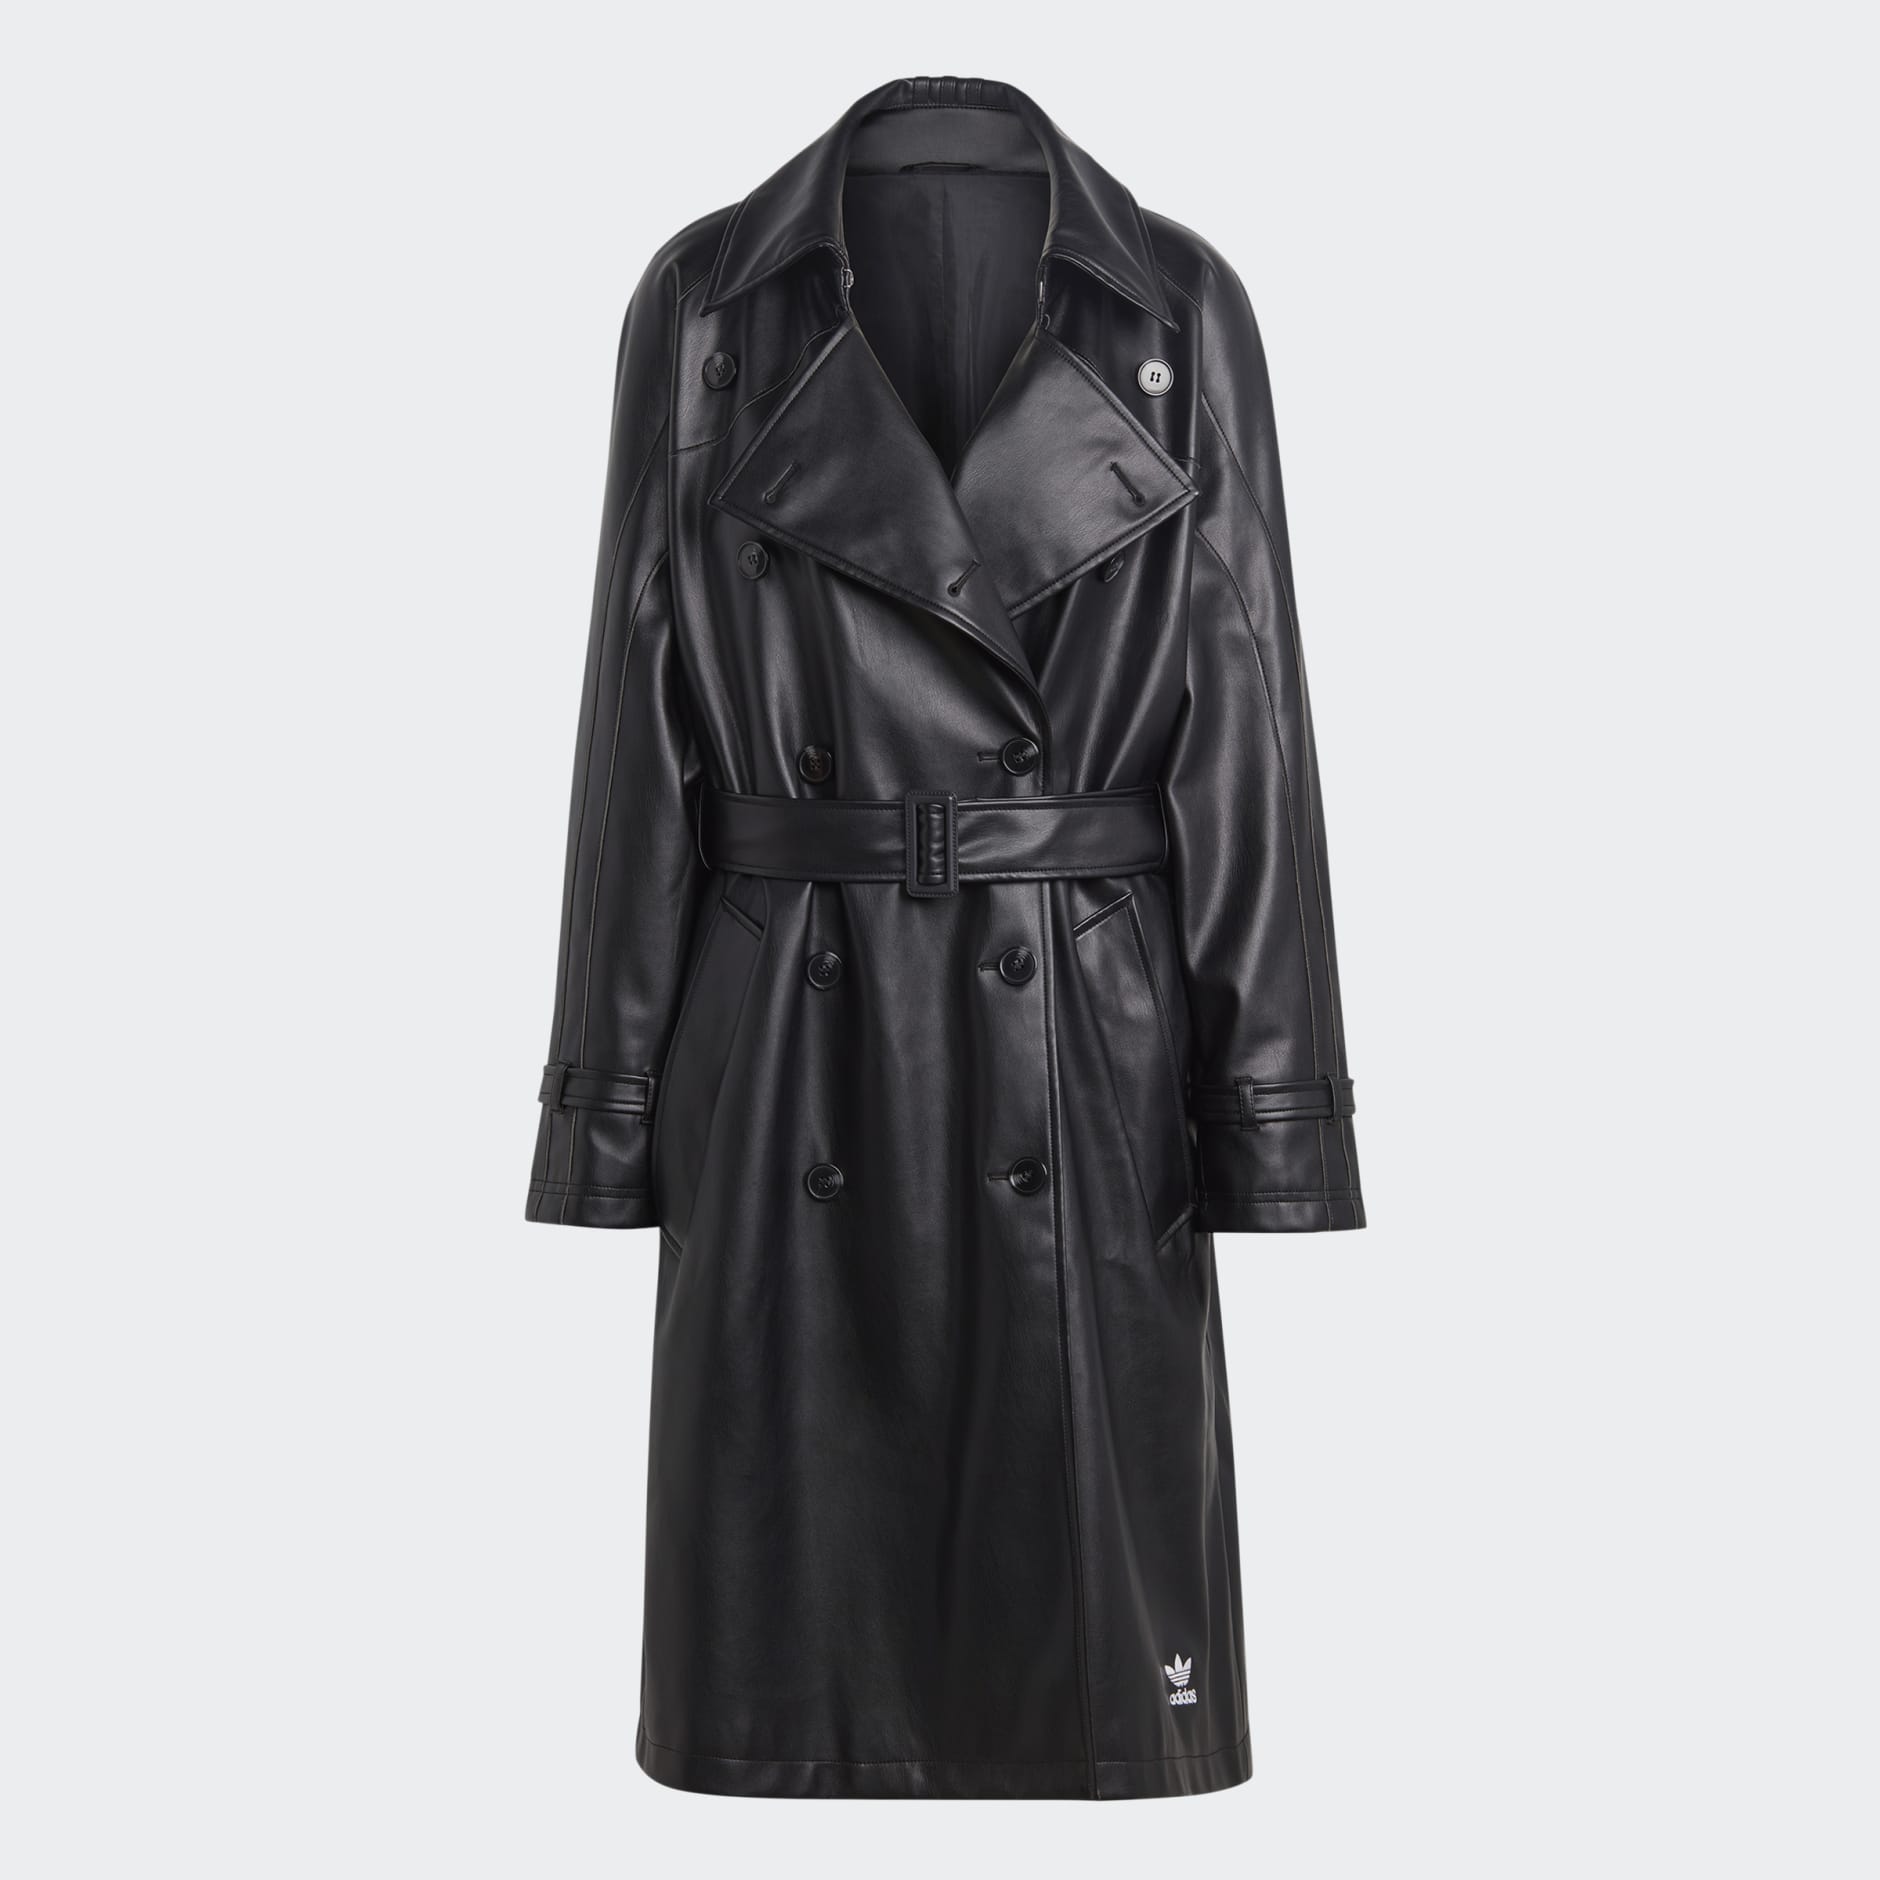 Centre Stage Faux Leather Trench Coat